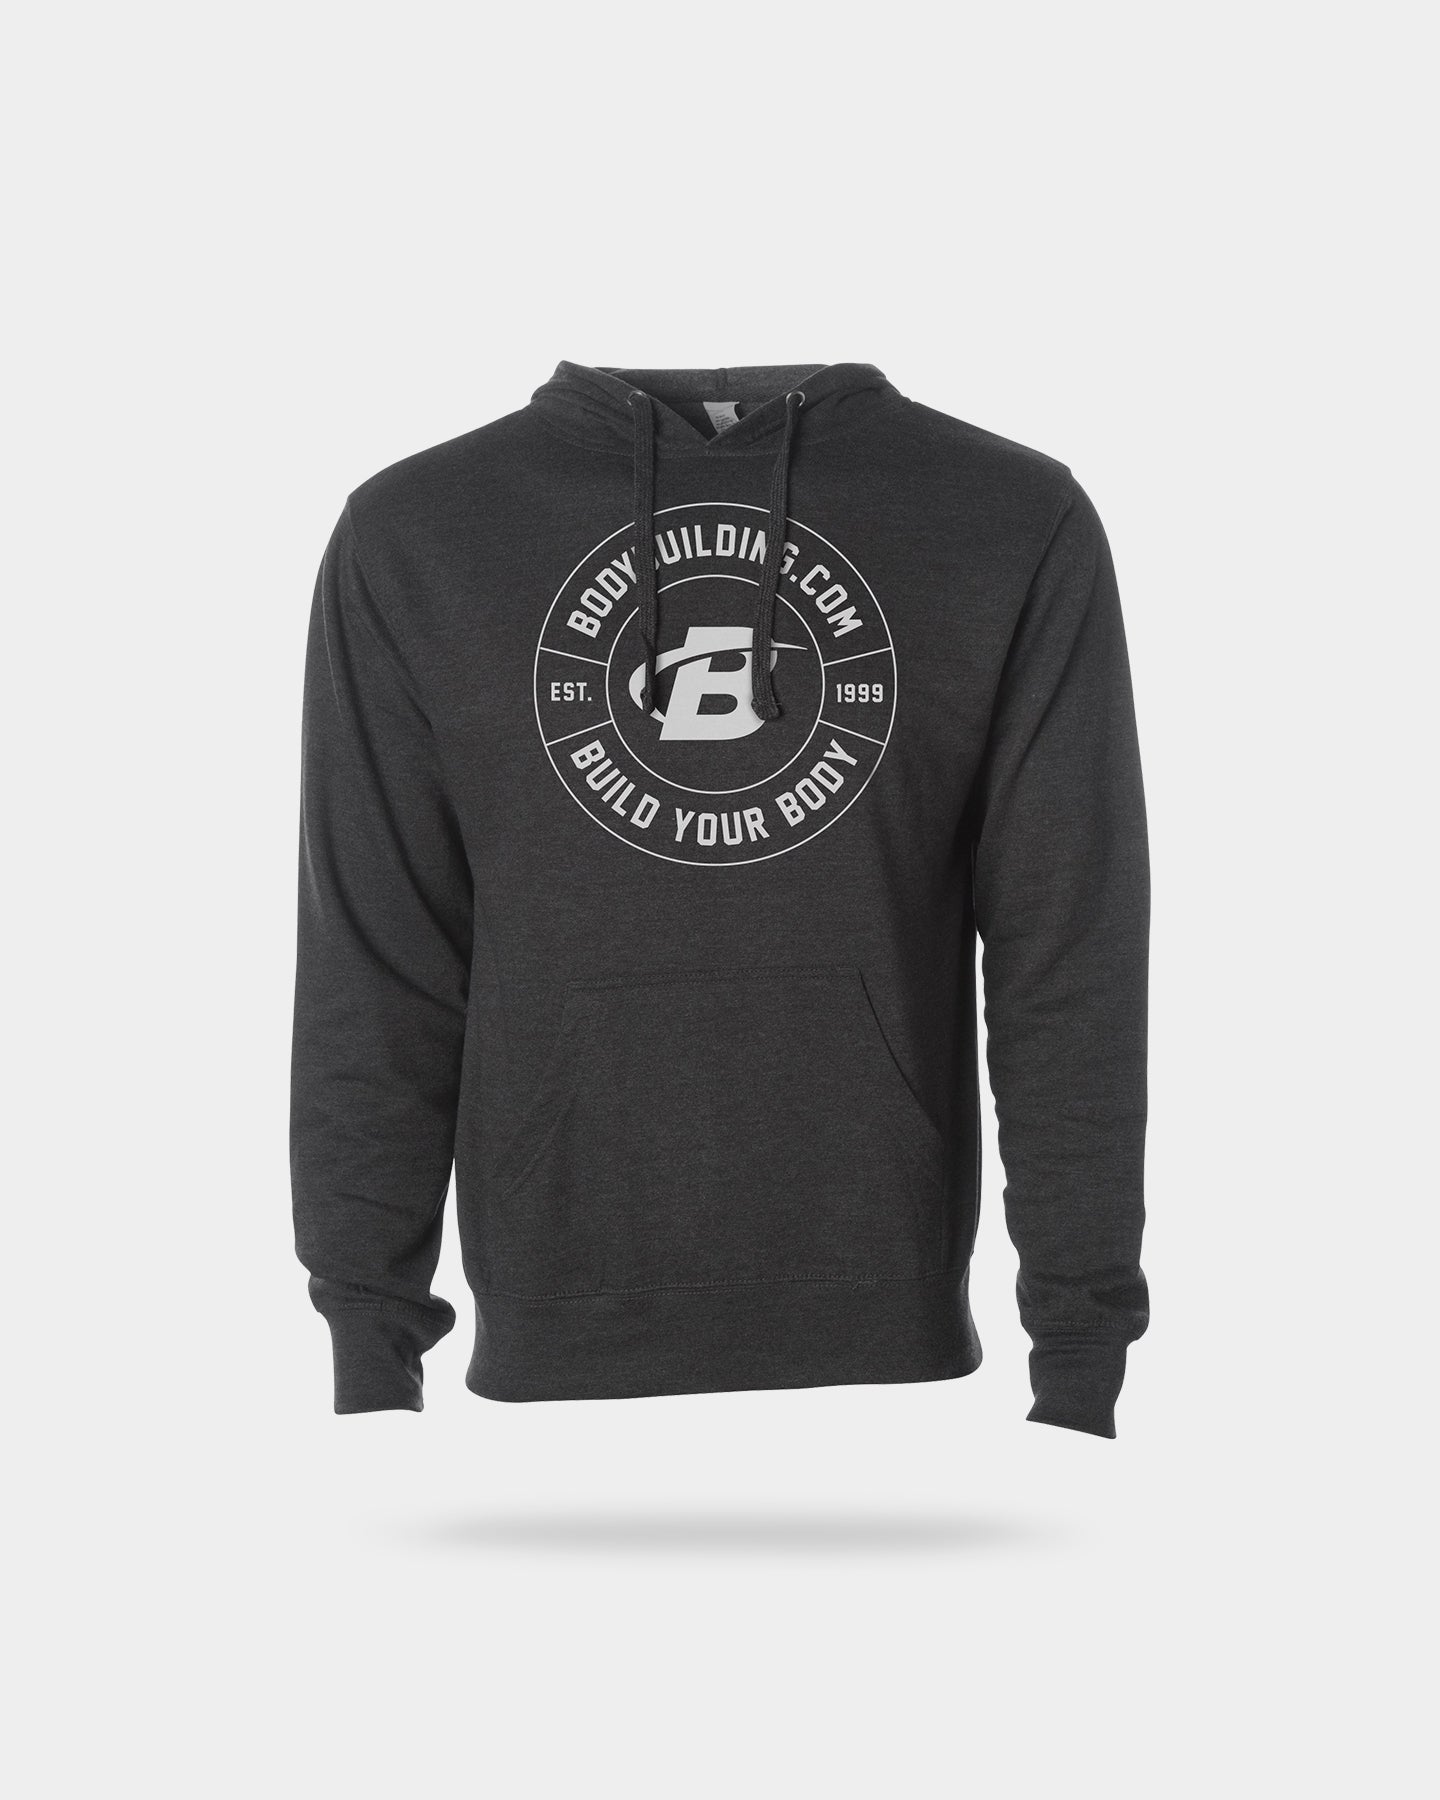 Image of Bodybuilding.com Build Your Body™ Club Seal Hoodie